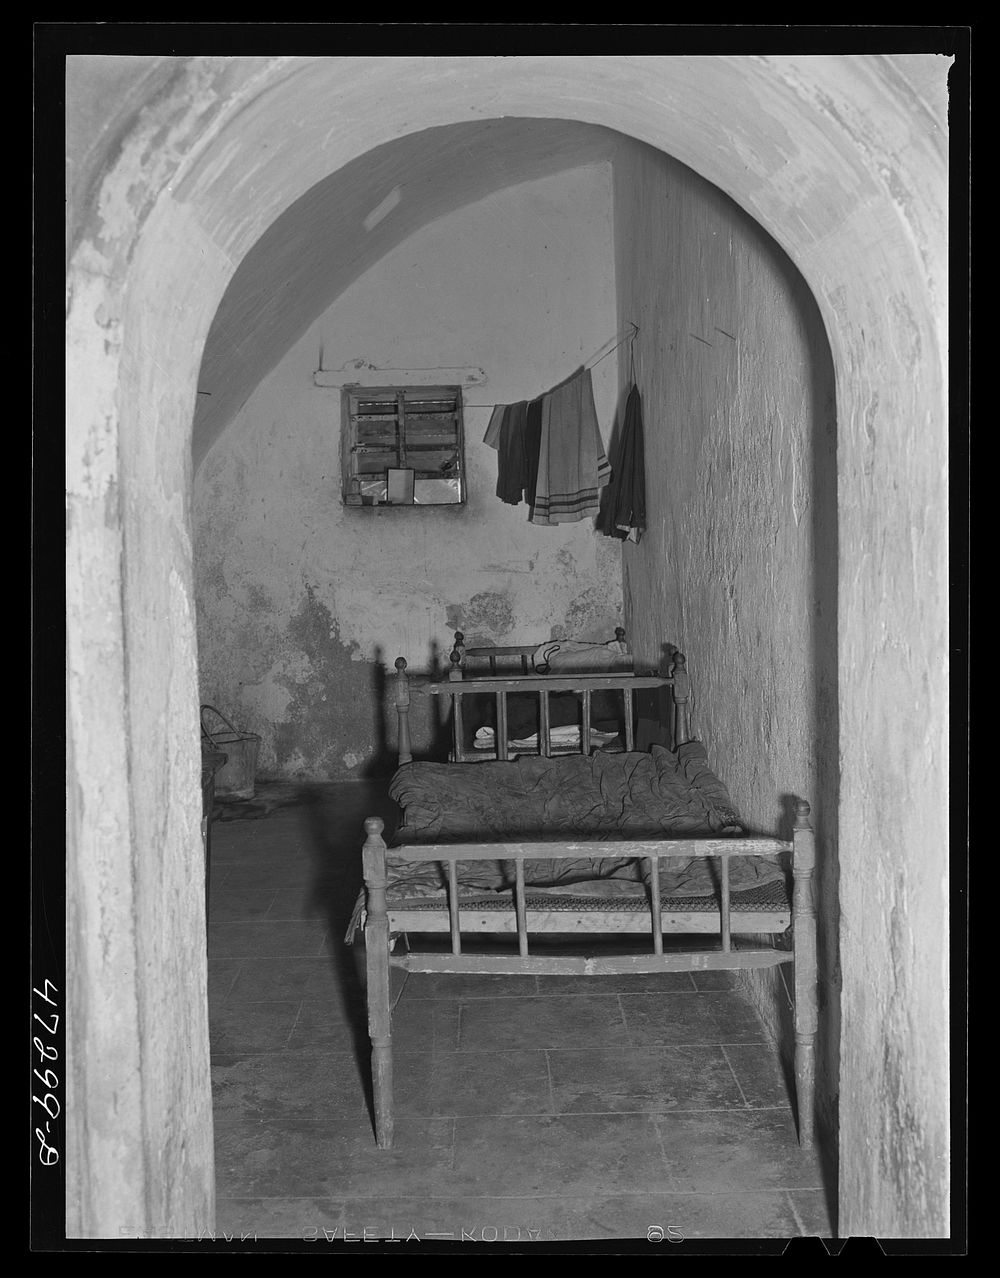 [Untitled photo, possibly related to: Charlotte Amalie, Saint Thomas Island, Virgin Islands. One of the cells in the old…